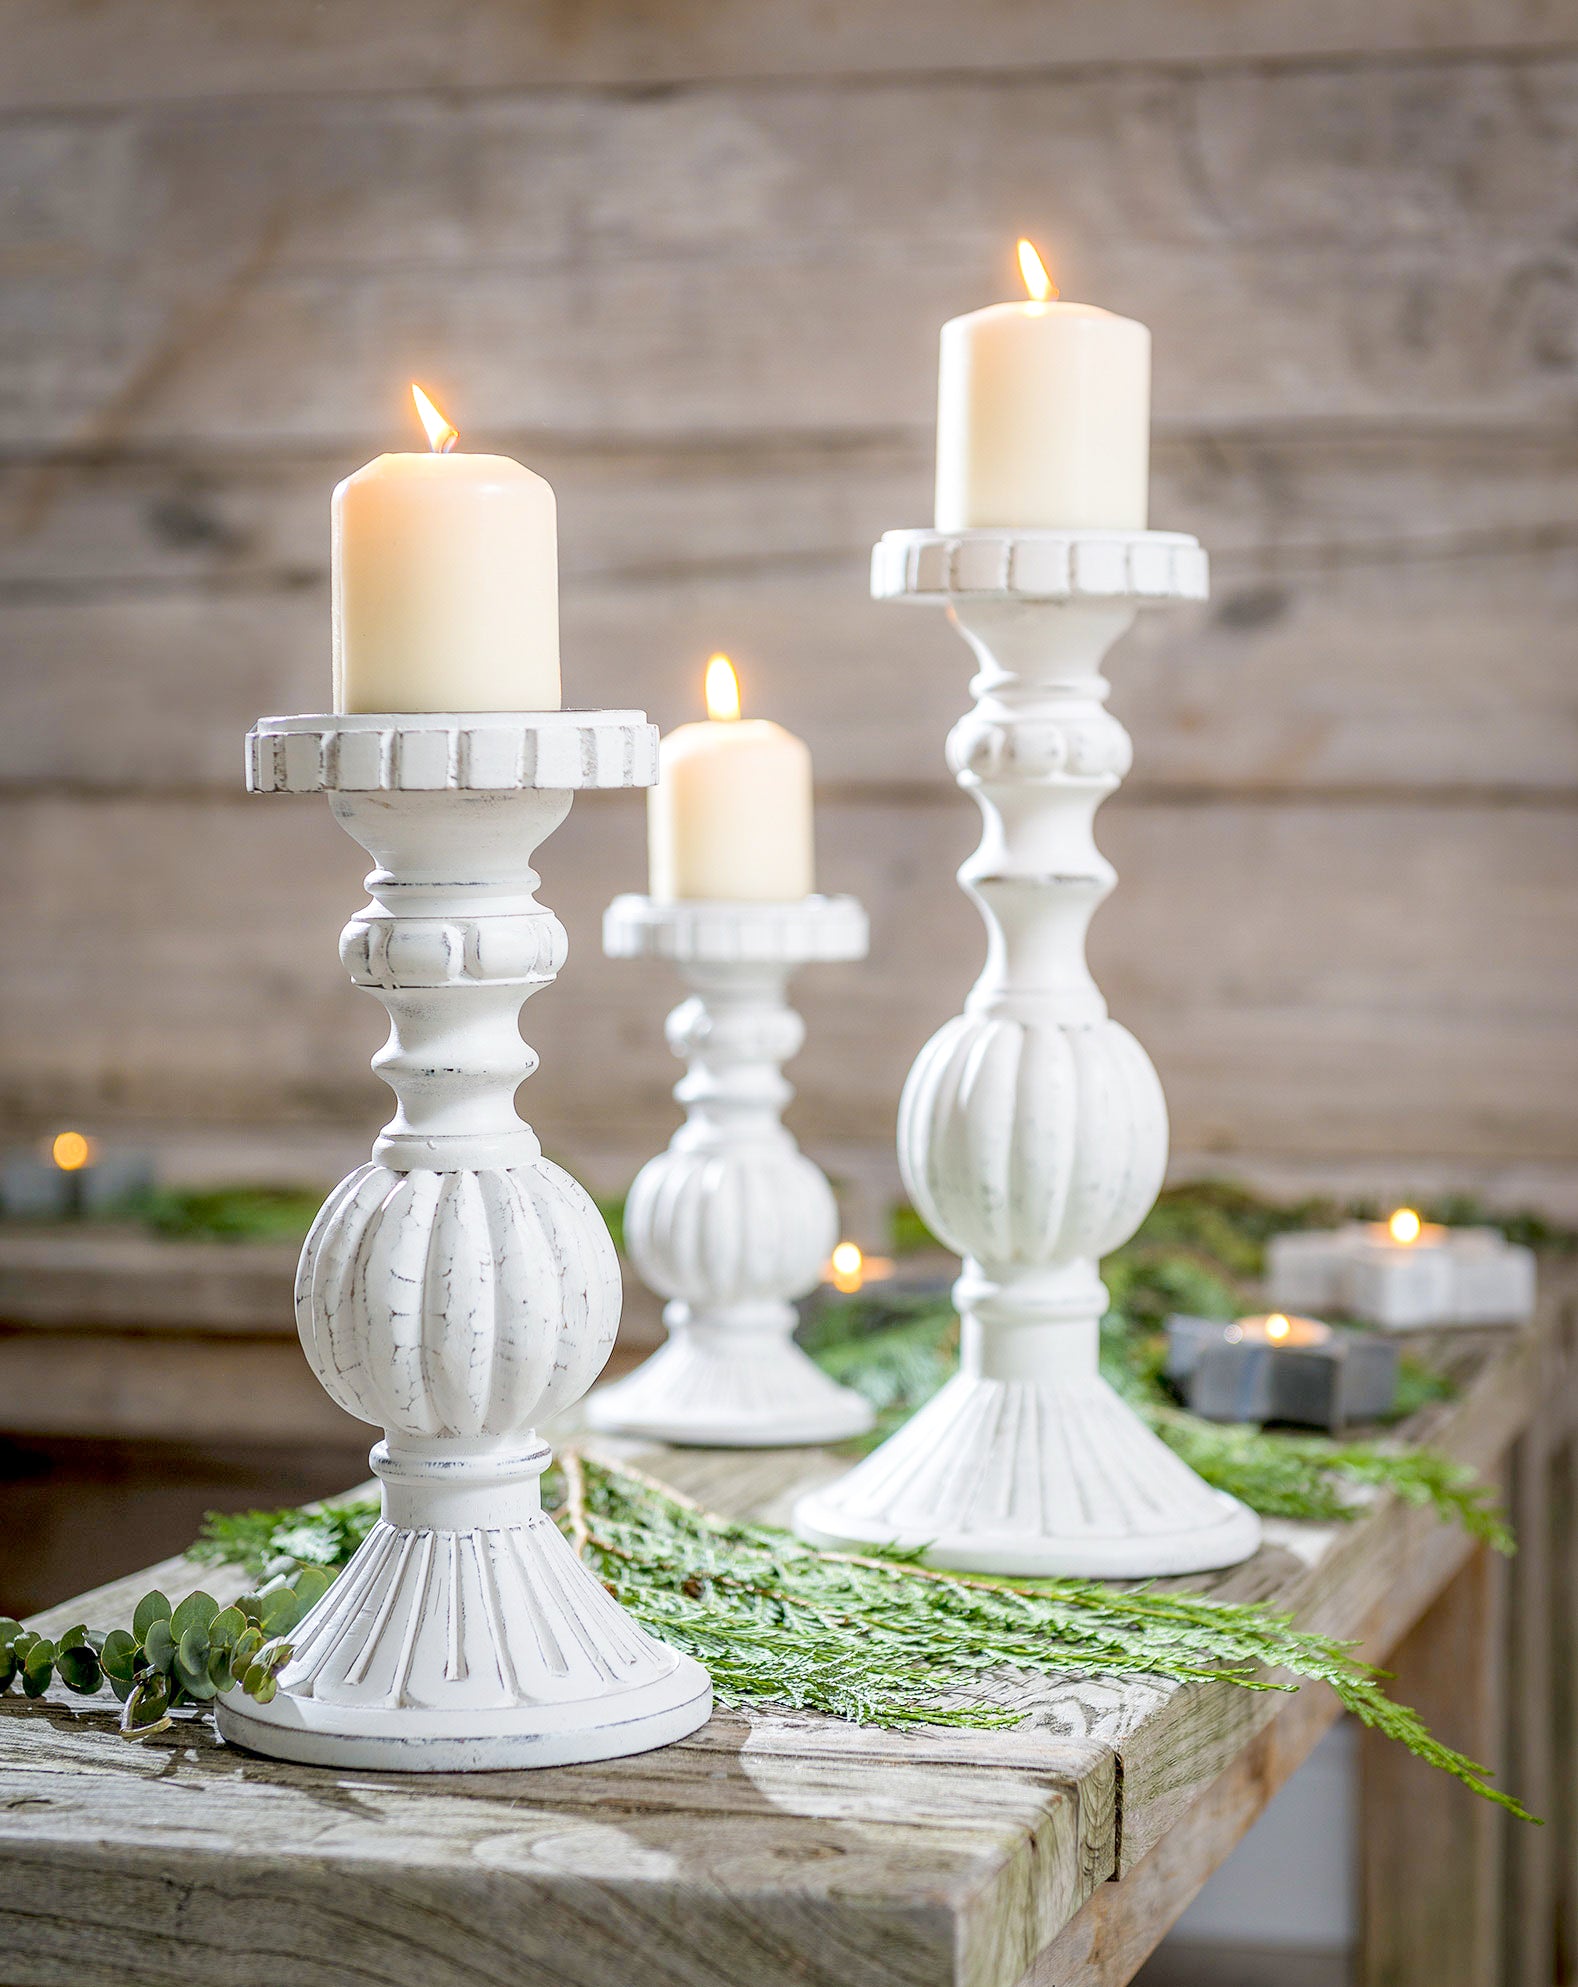 White Natural Wood Carved Candle Sticks - 3 Sizes - Peony Blossom